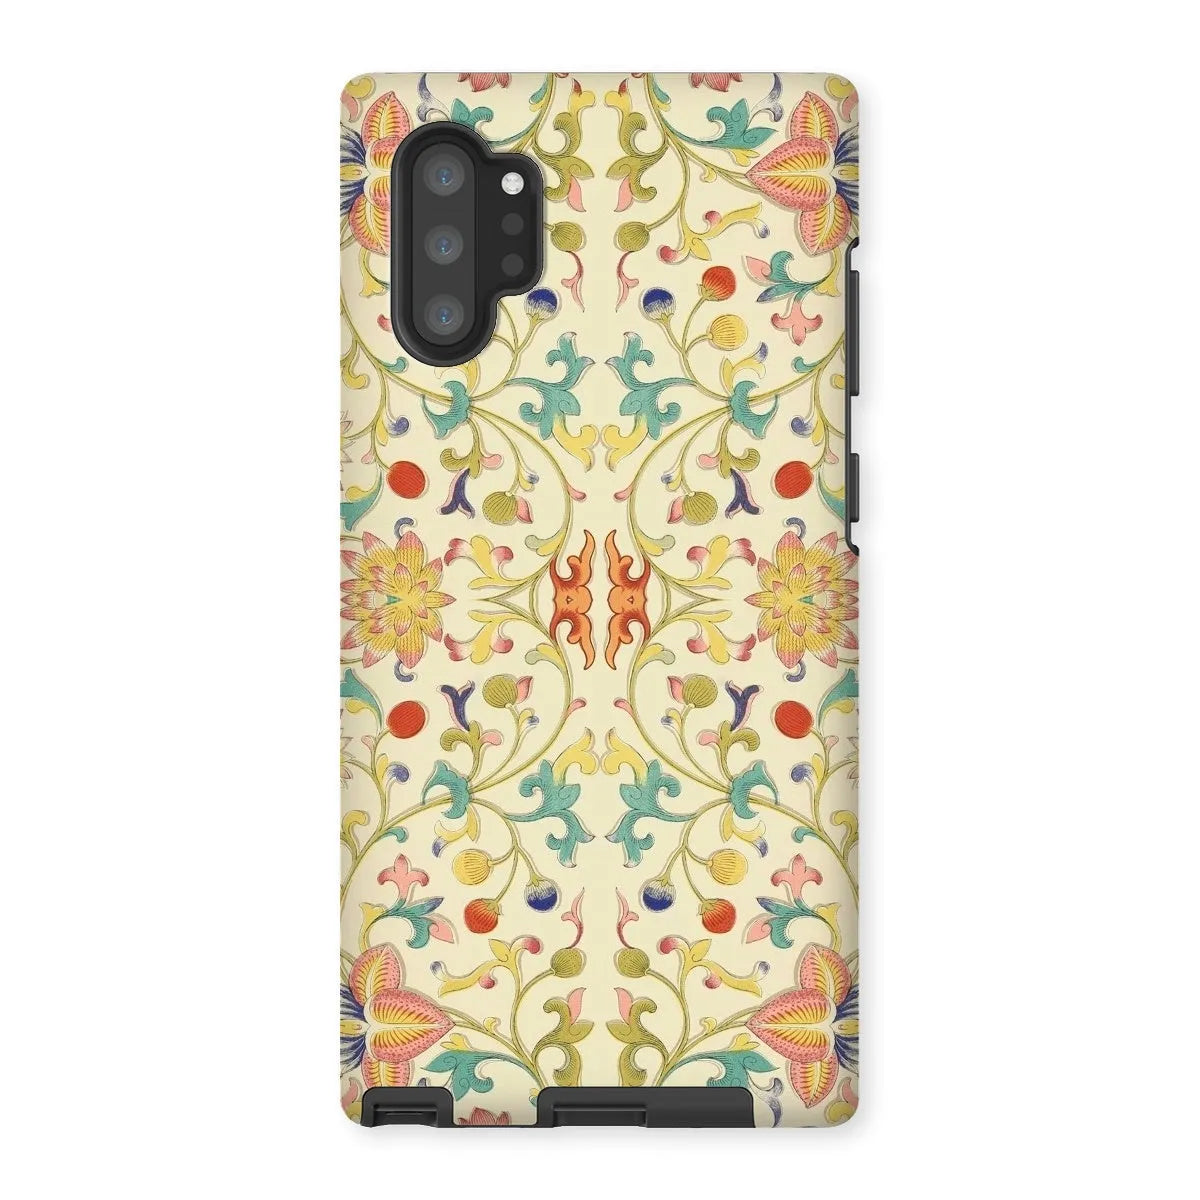 Over The Rainbow - Chinoiserie Pattern Art Phone Case - Samsung Galaxy Note 10p / Matte - Mobile Phone Cases